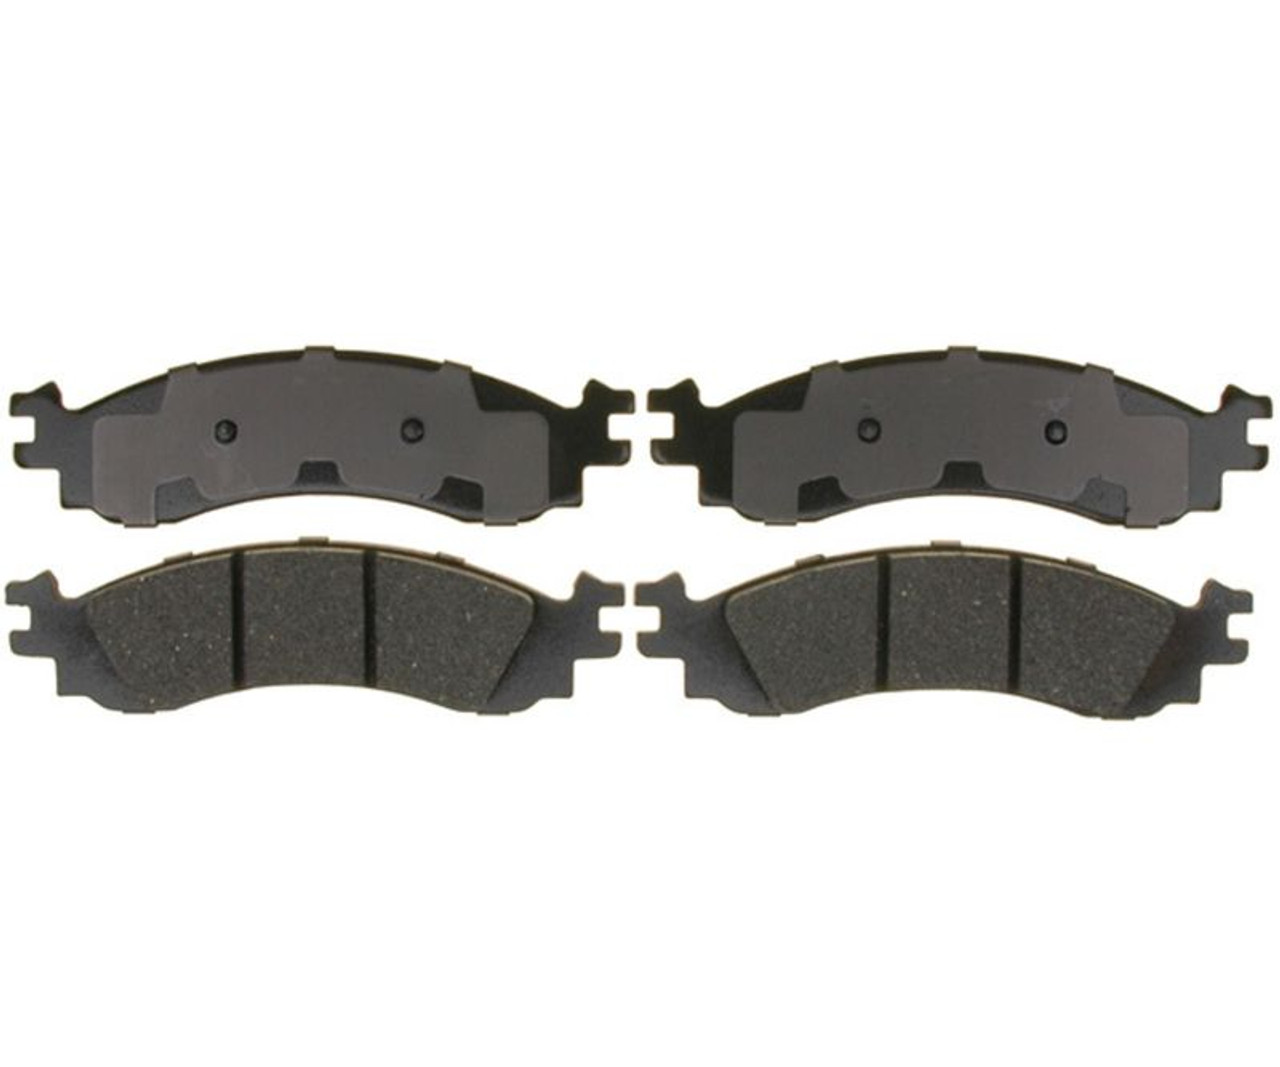 Raybestos ATD1158C Advanced Technology Ceramic Disc Brake Pad Set- 06-12 Ford (Front)